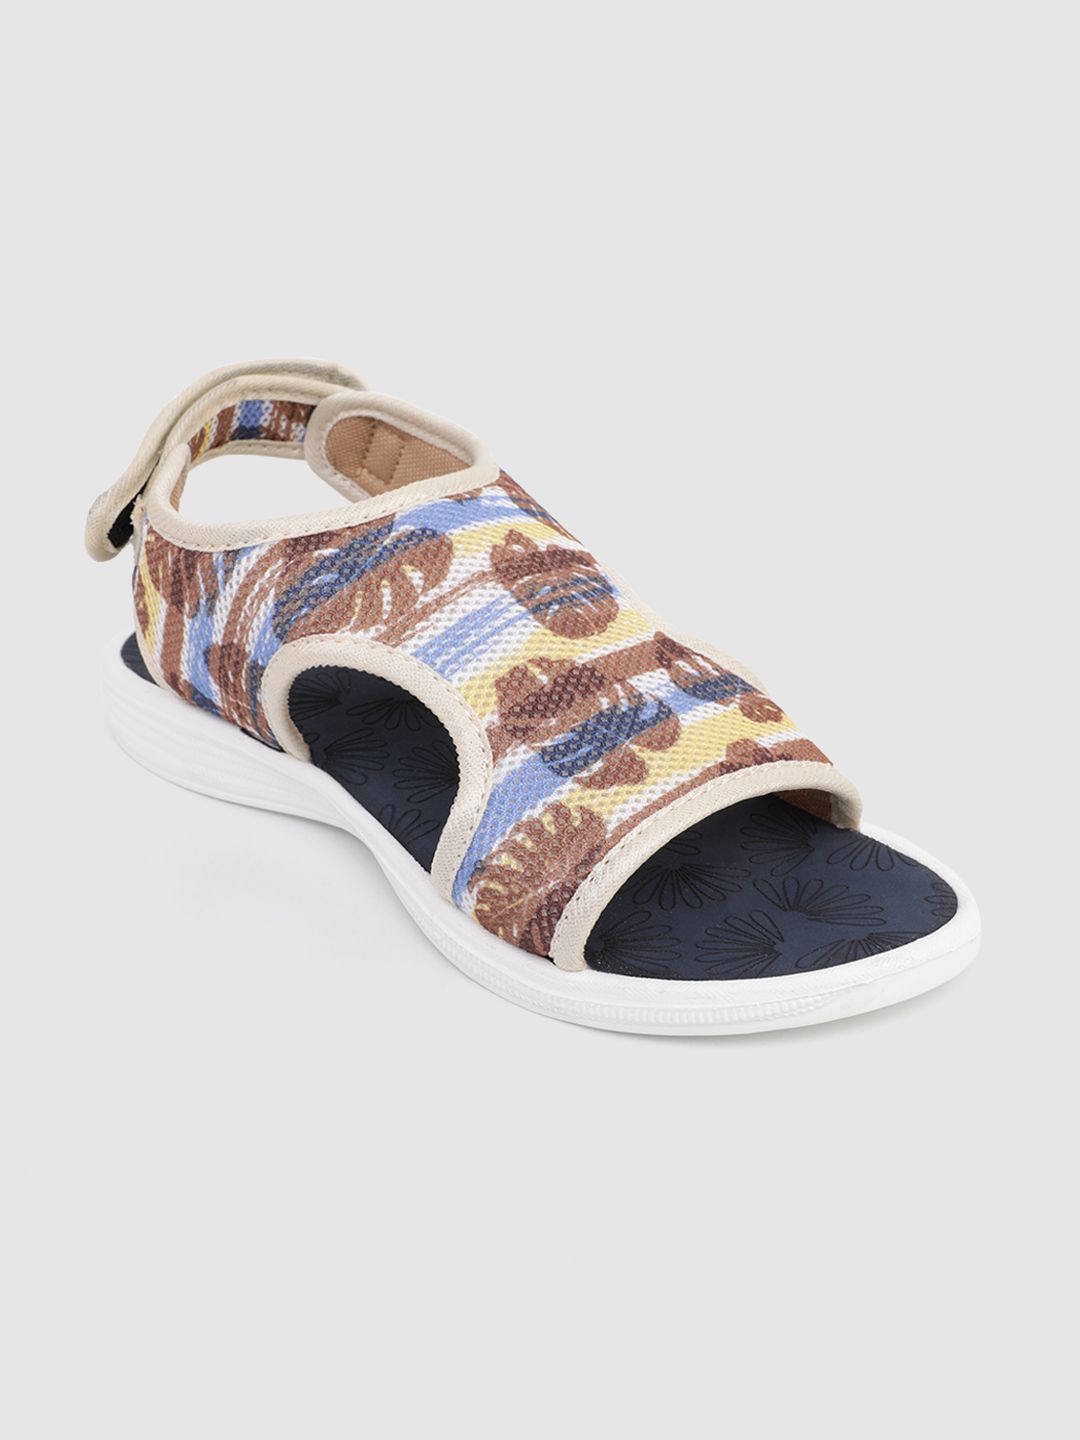 Kook N Keech Women Multicoloured Printed Sports Sandals with Cut-Out Detail Price in India